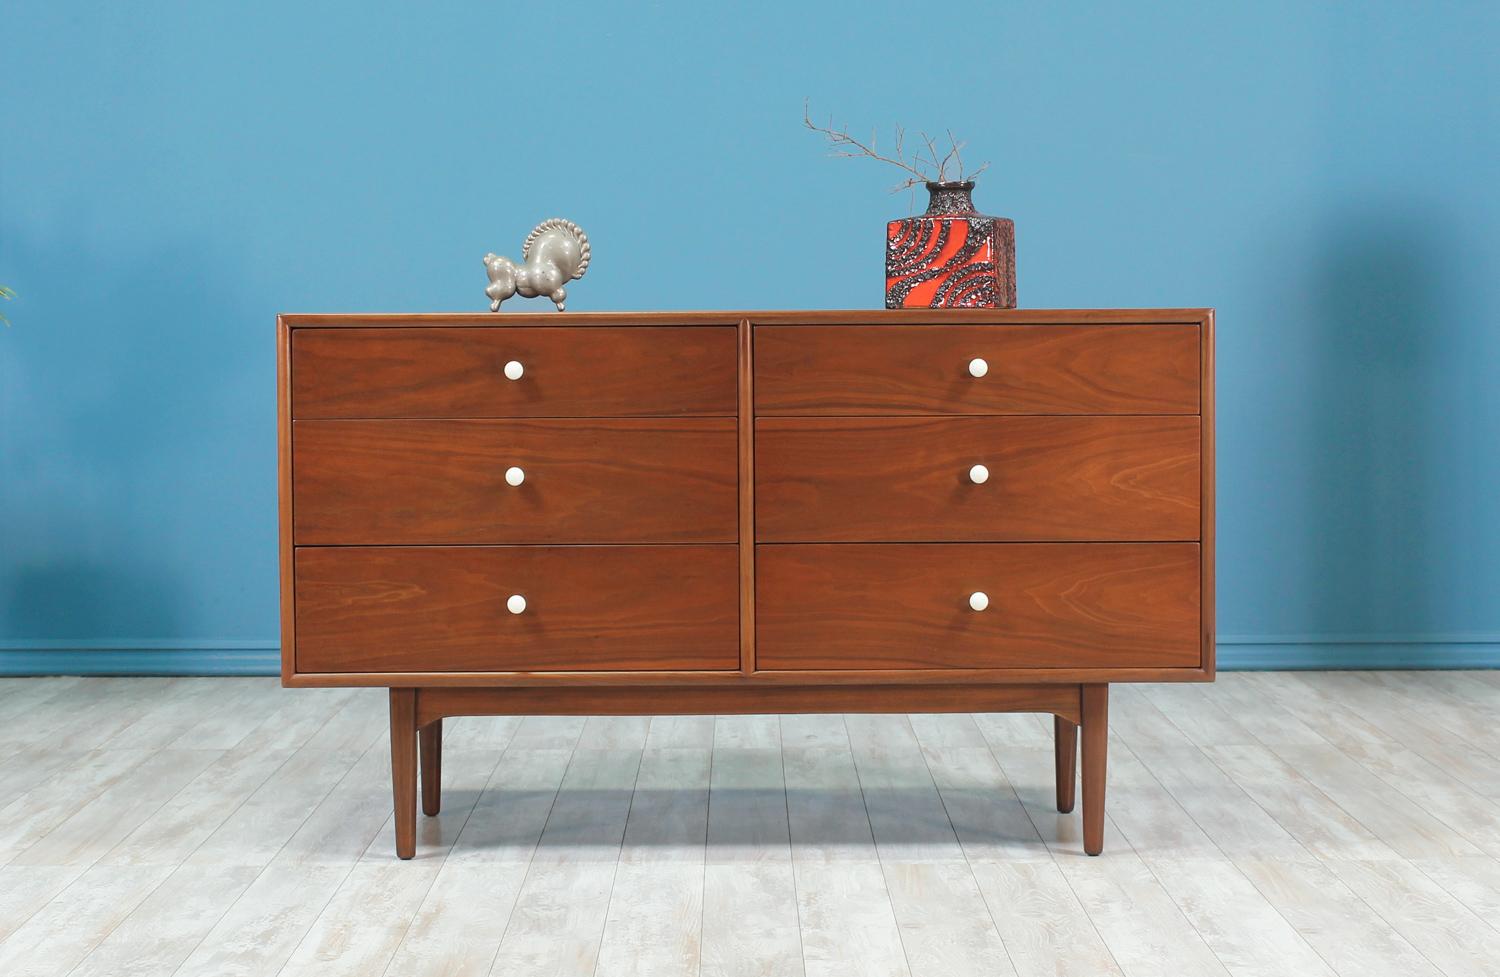 Splendid dresser designed by Kipp Stewart & Stewart MacDougall for Drexel’s Declaration line in the United States circa 1960’s. This beautiful dresser has been recently refinished by our expert team keeping its original pieces. It features six